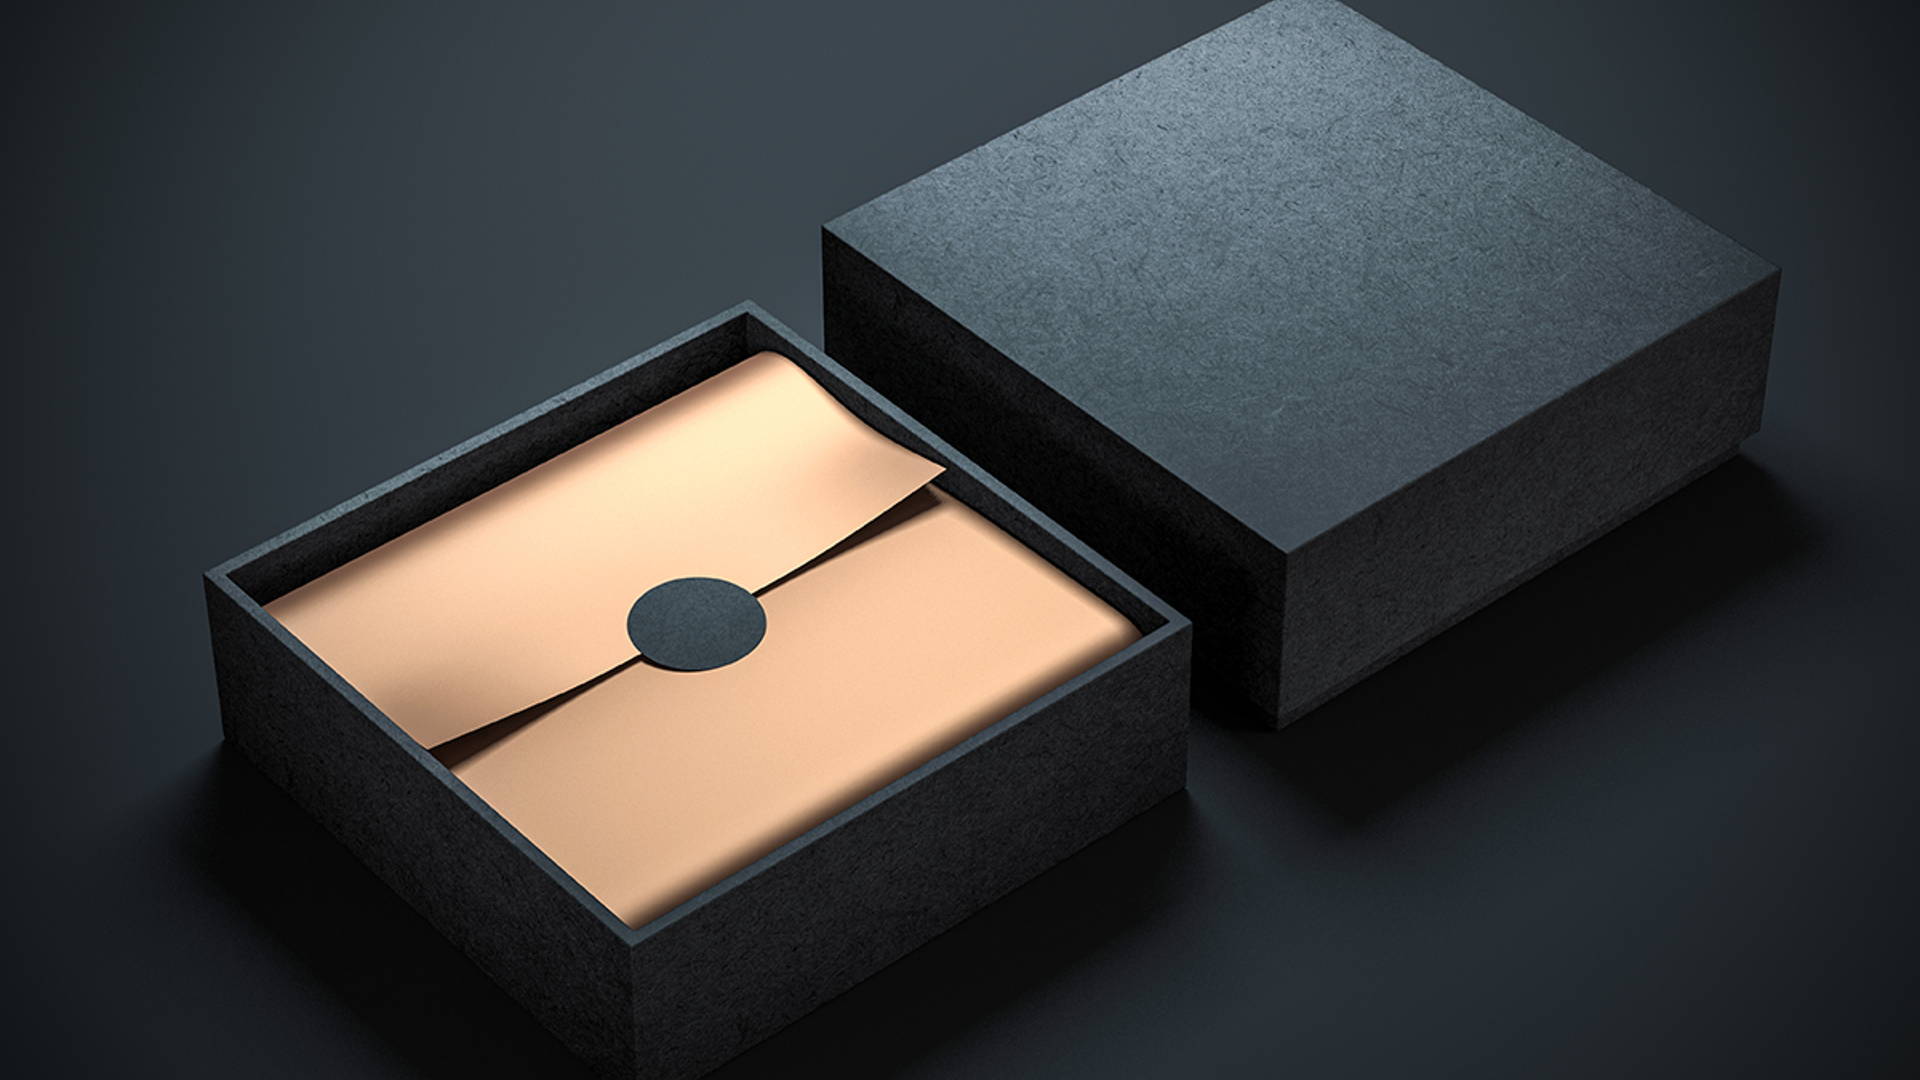 Featured image for Building Anticipation through Luxury Packaging